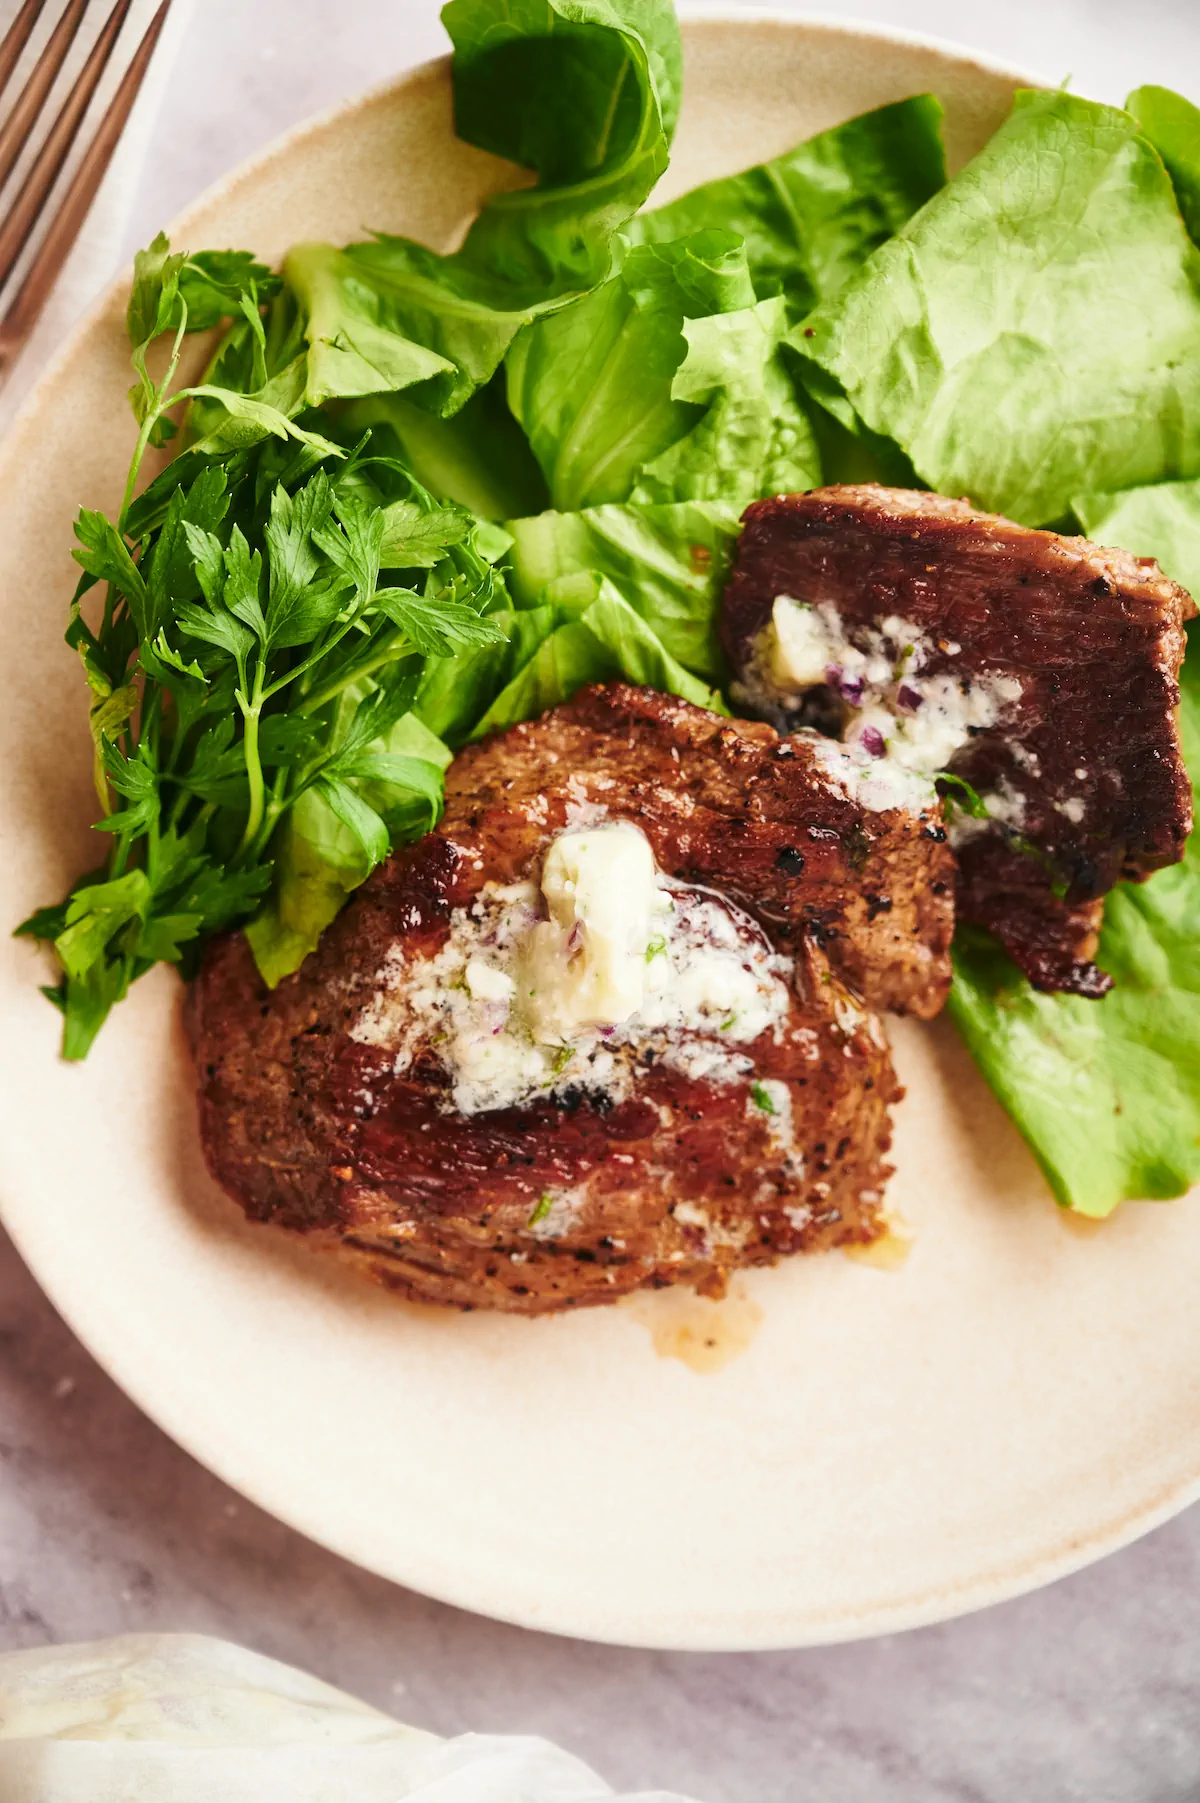 Homemade flat iron steak topped with herb butter and served alongside fresh greens on a plate.